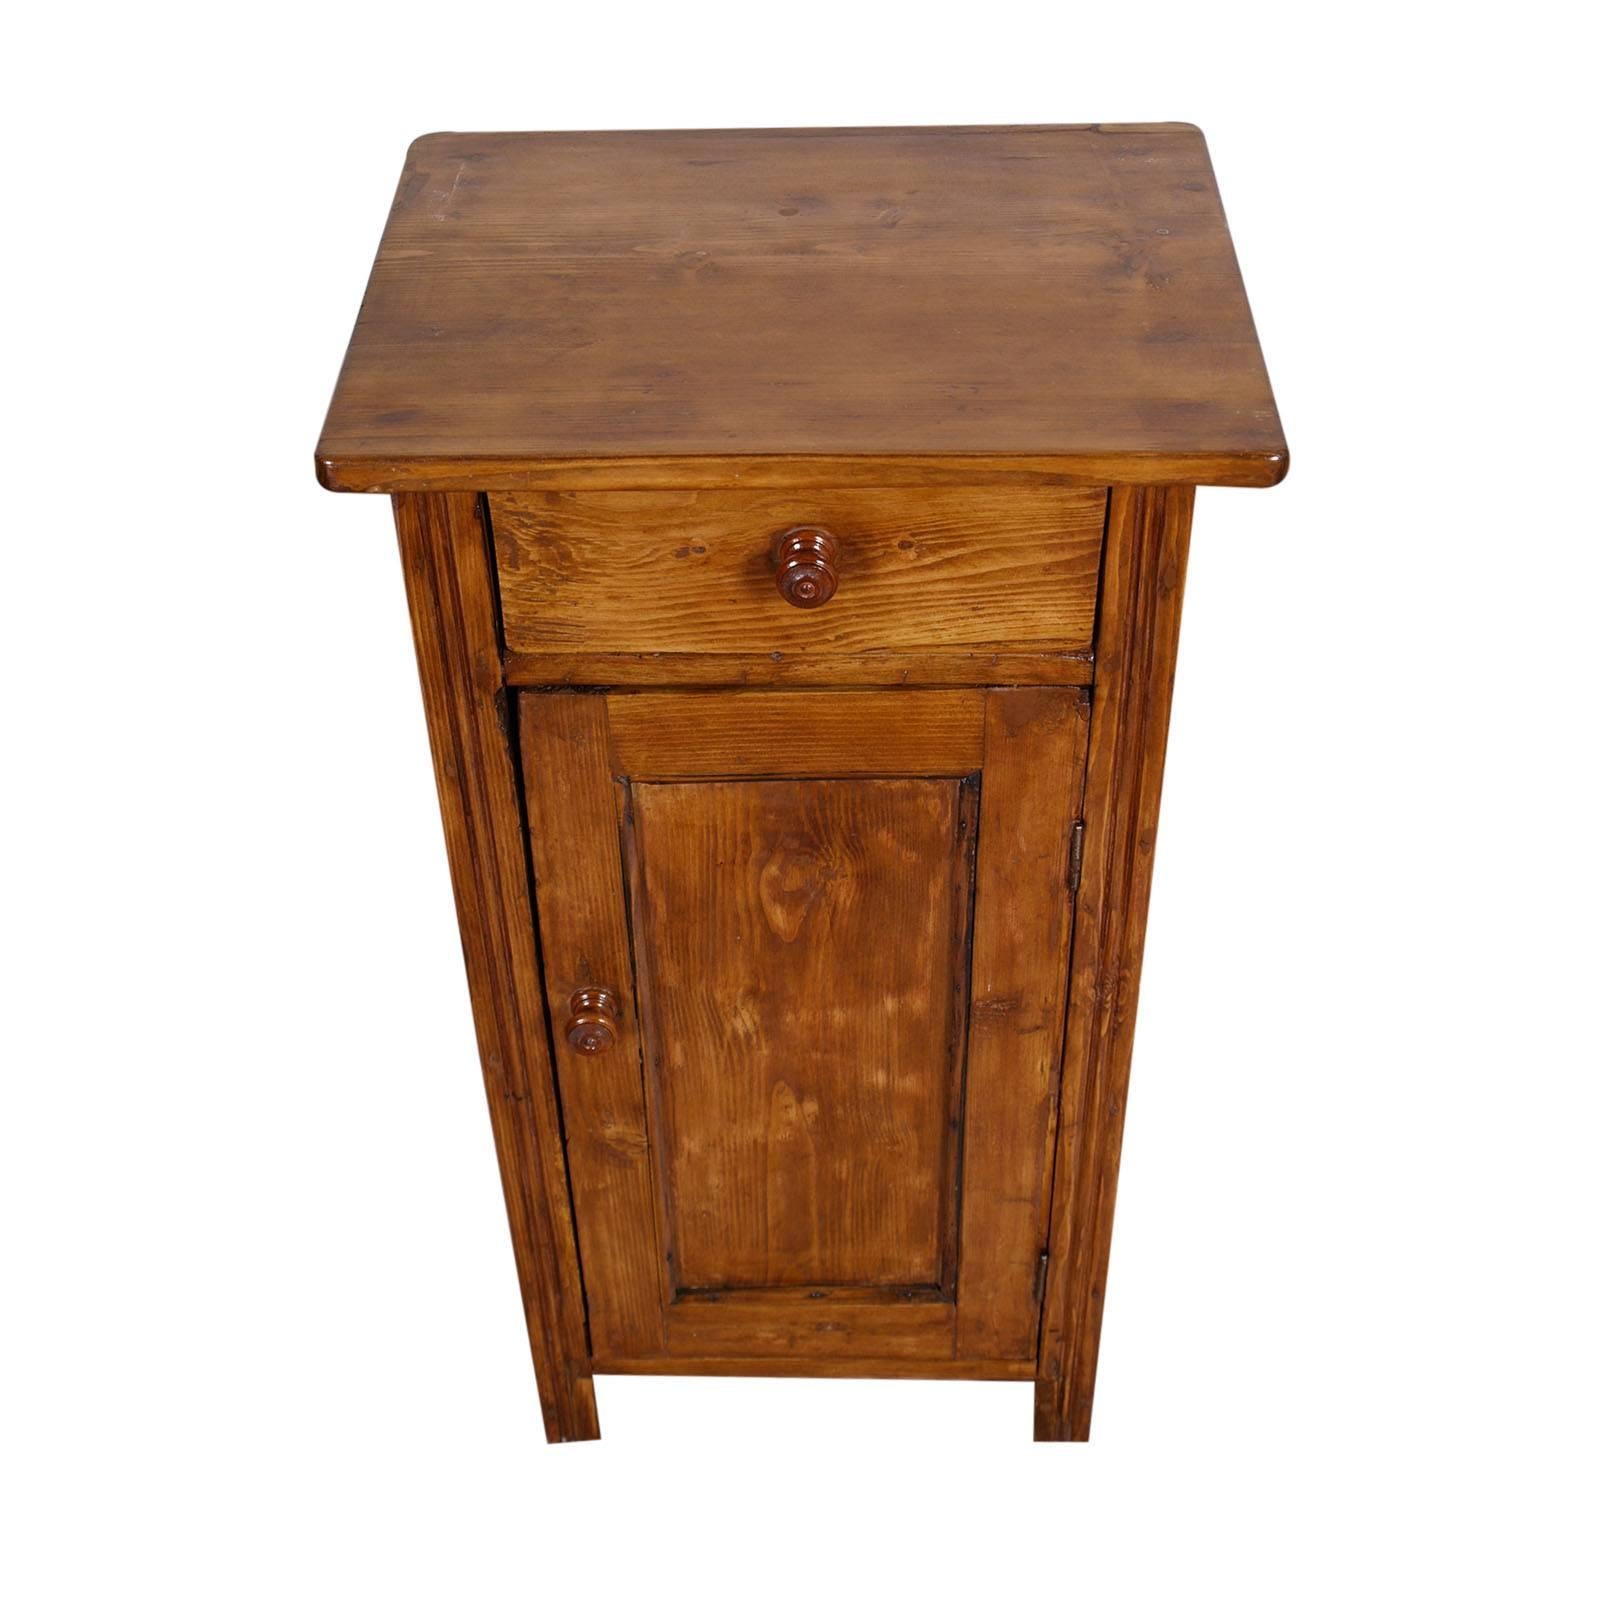 Late 19th century country rustic tyrolean nightstand, in wood of larch, restored polished to wax
Good conditions

Measure cm: H 83, W 43, D 34.
  